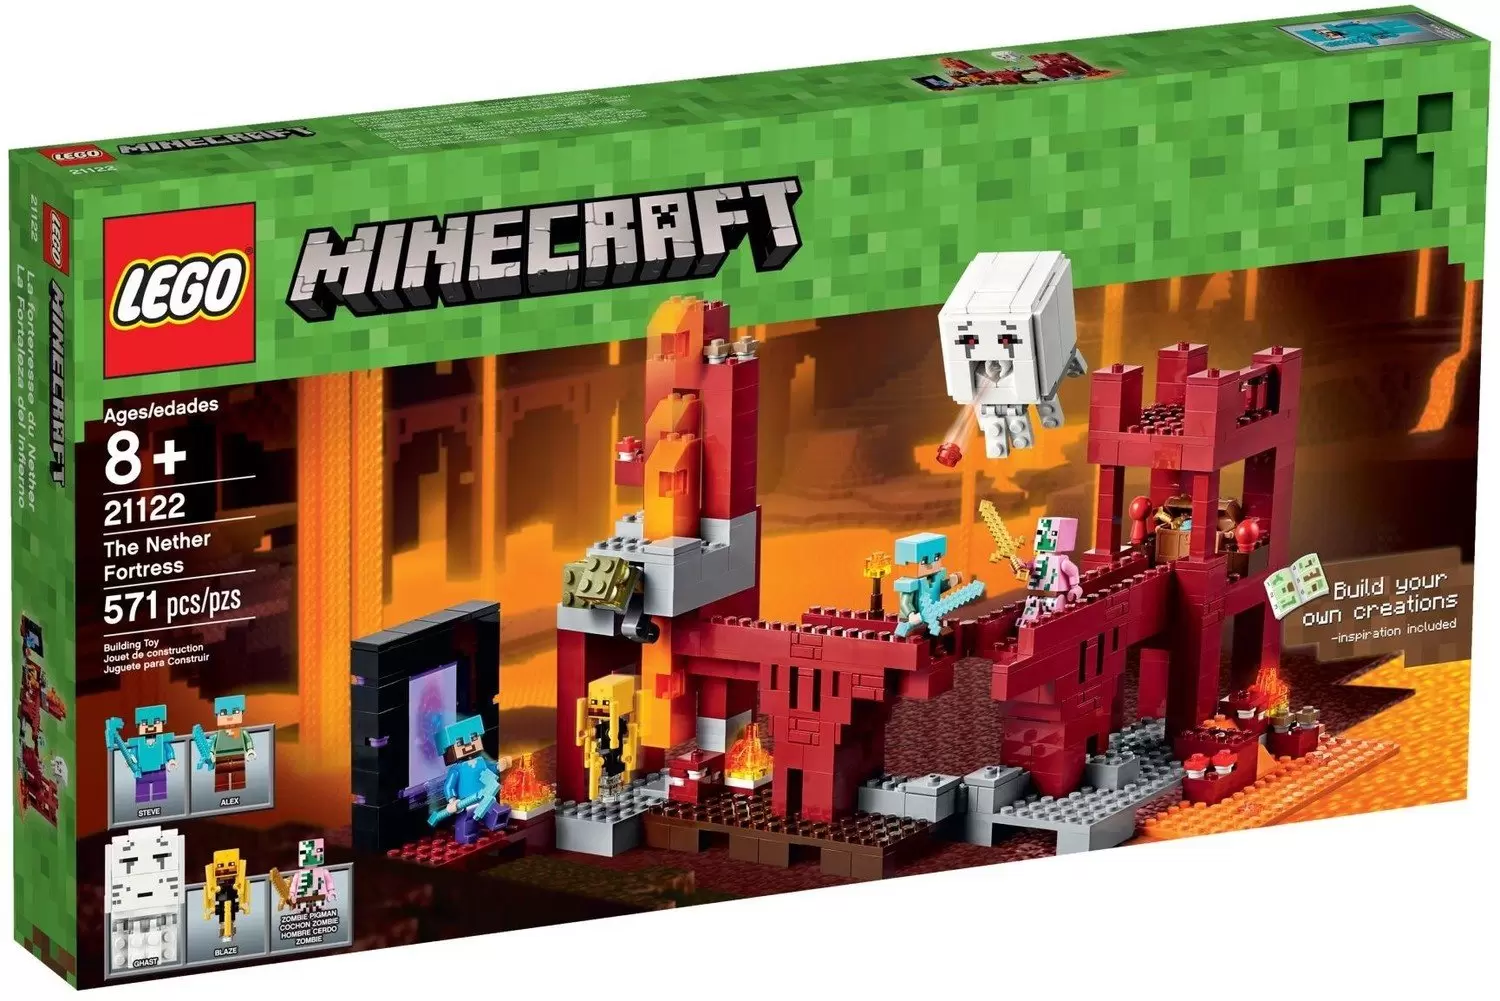 LEGO Minecraft - The Nether Fortress